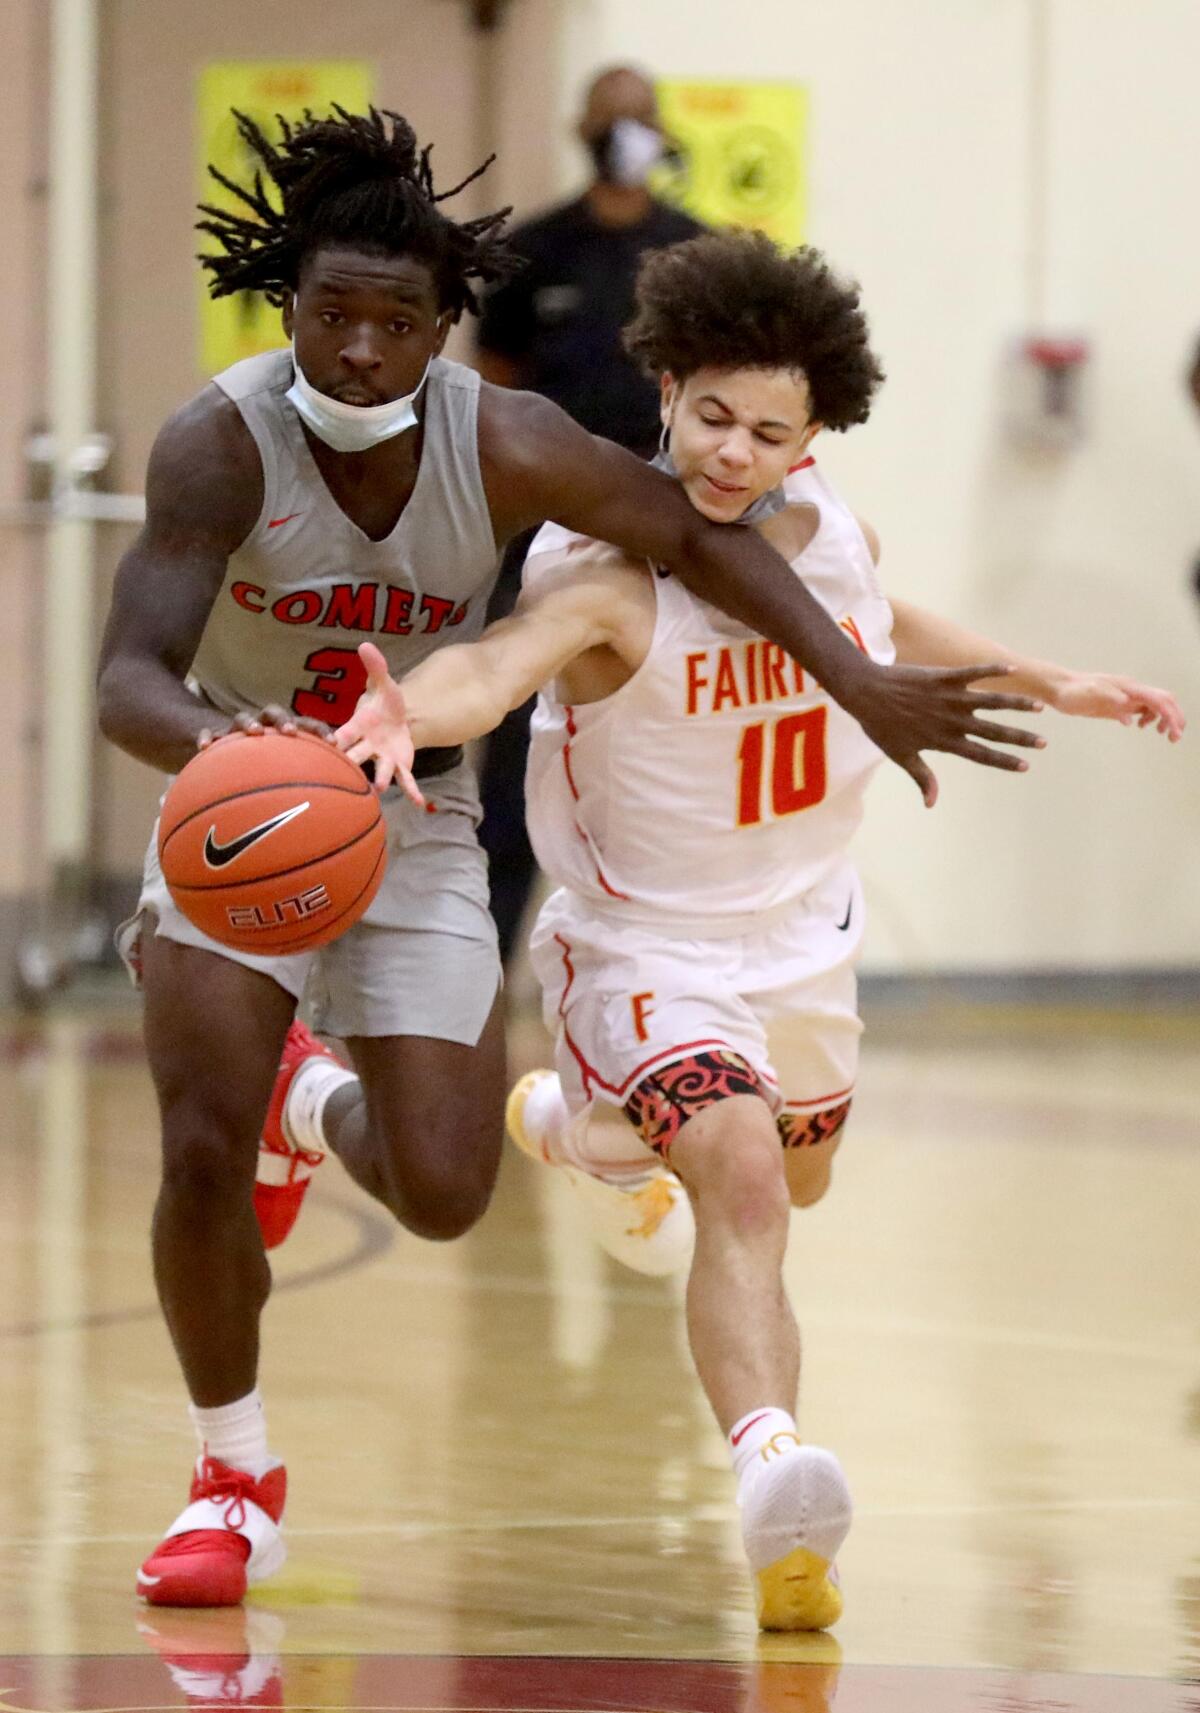 Fairfax's David Mack goes for a steal as Westchester's Zion Sutton drives down the court.